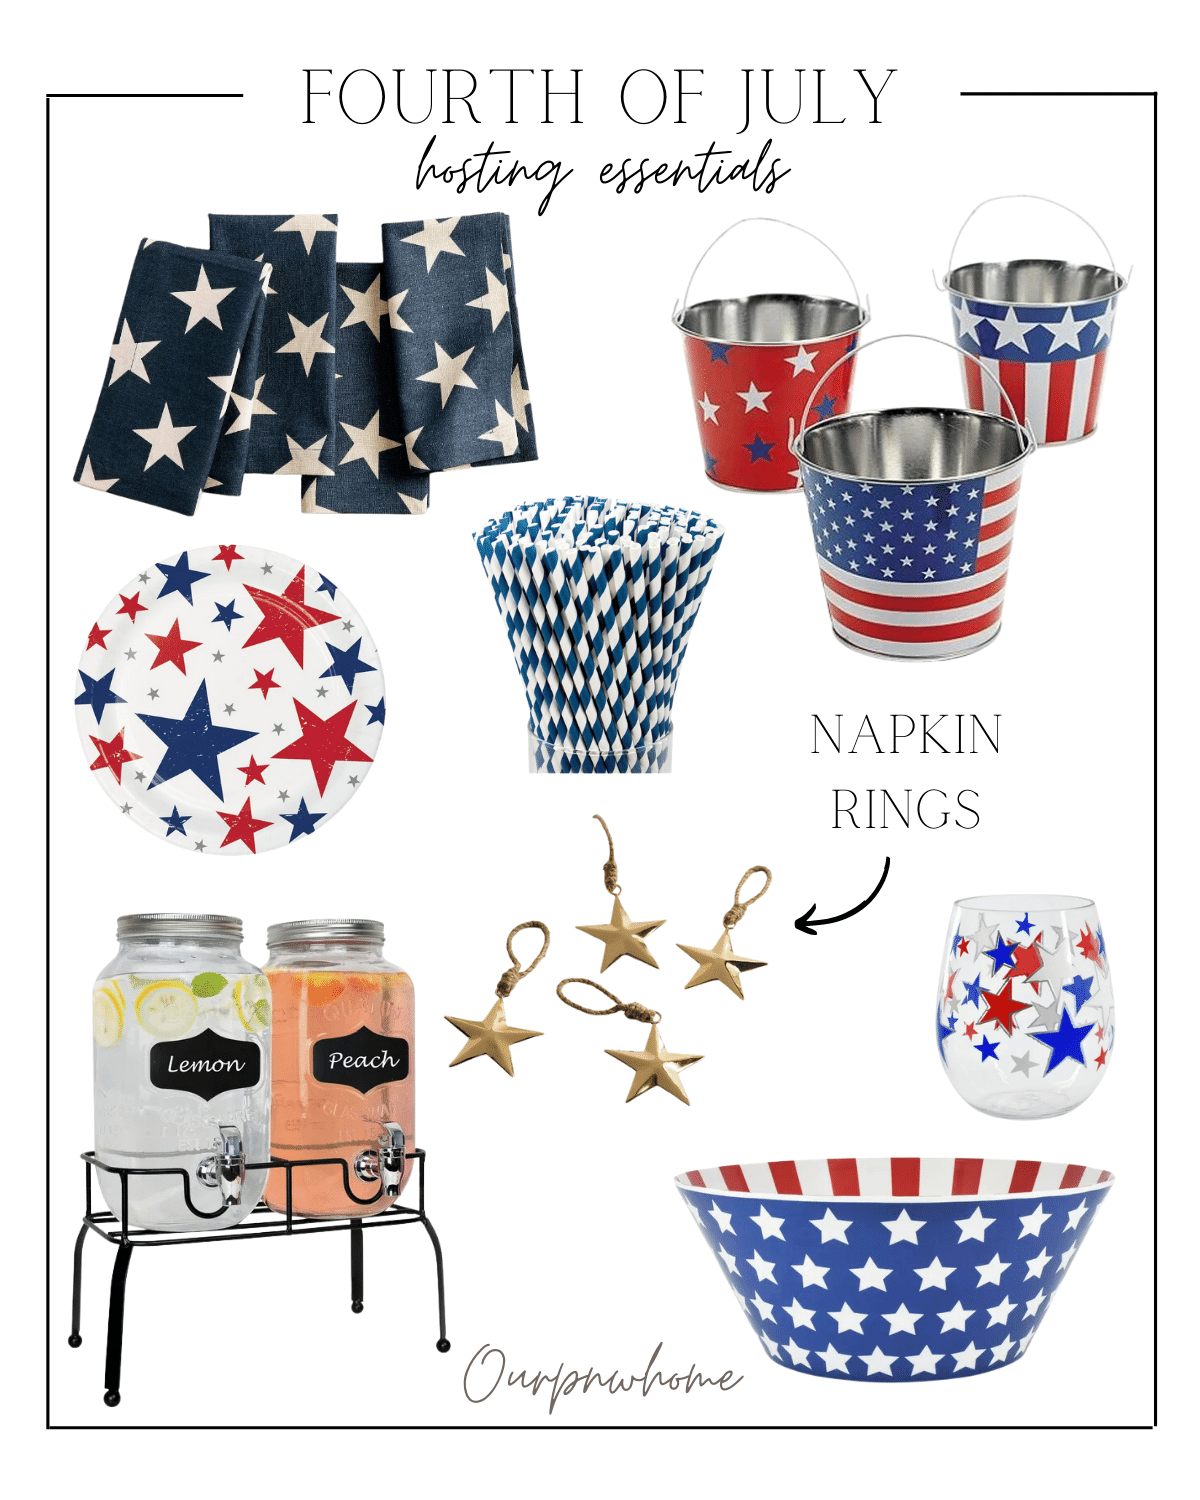 fourth of july, party decor, festive party decor, hosting essentials, beer buckets, napkins, plates, drink dispensers, 4th of july